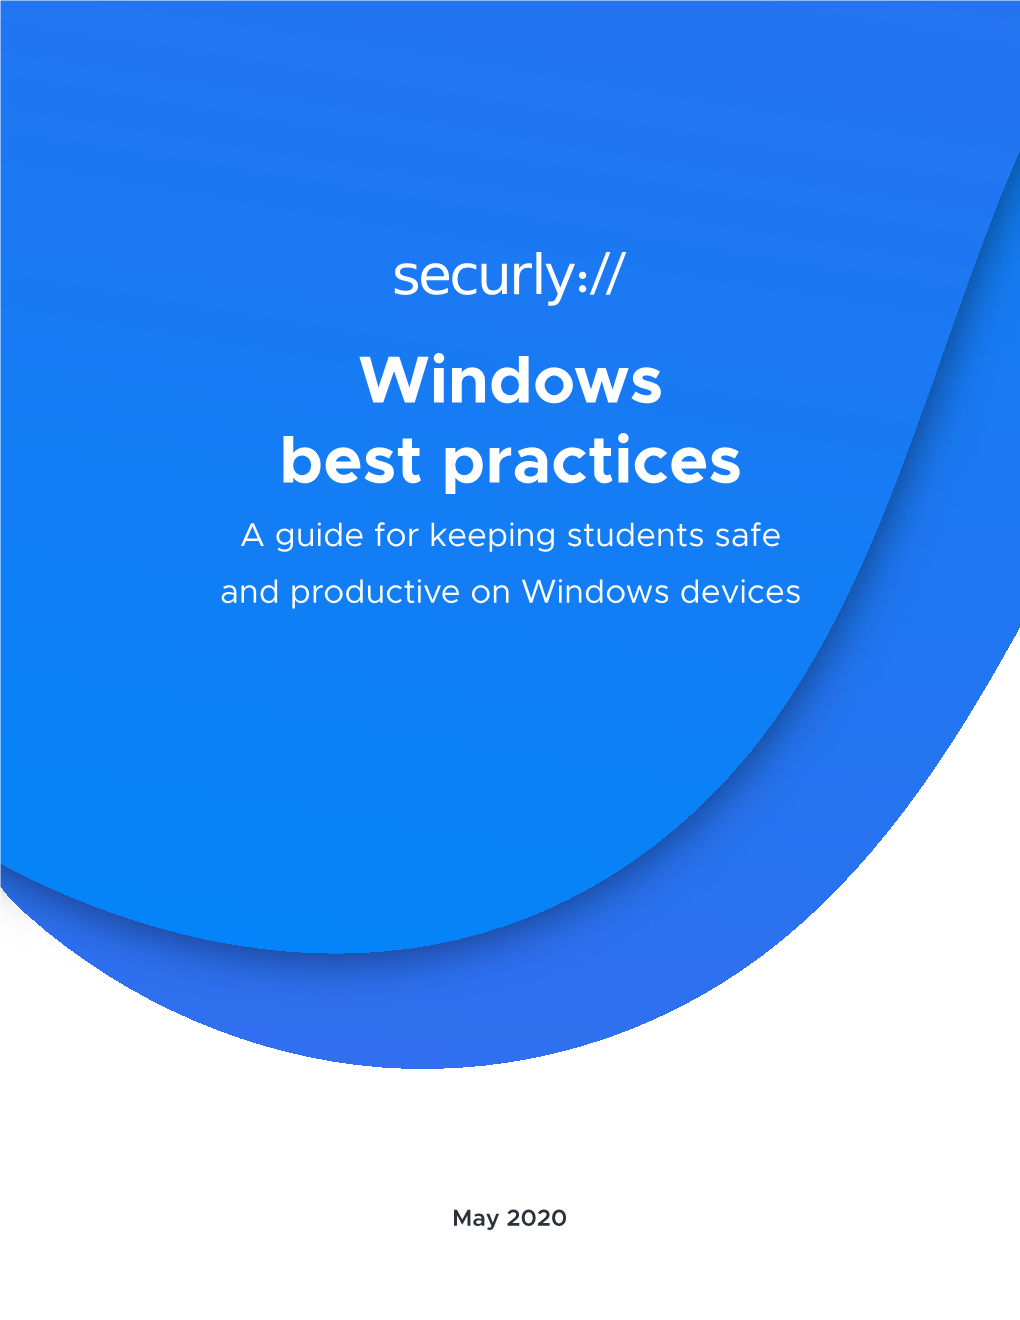 Windows Best Practices a Guide for Keeping Students Safe and Productive on Windows Devices